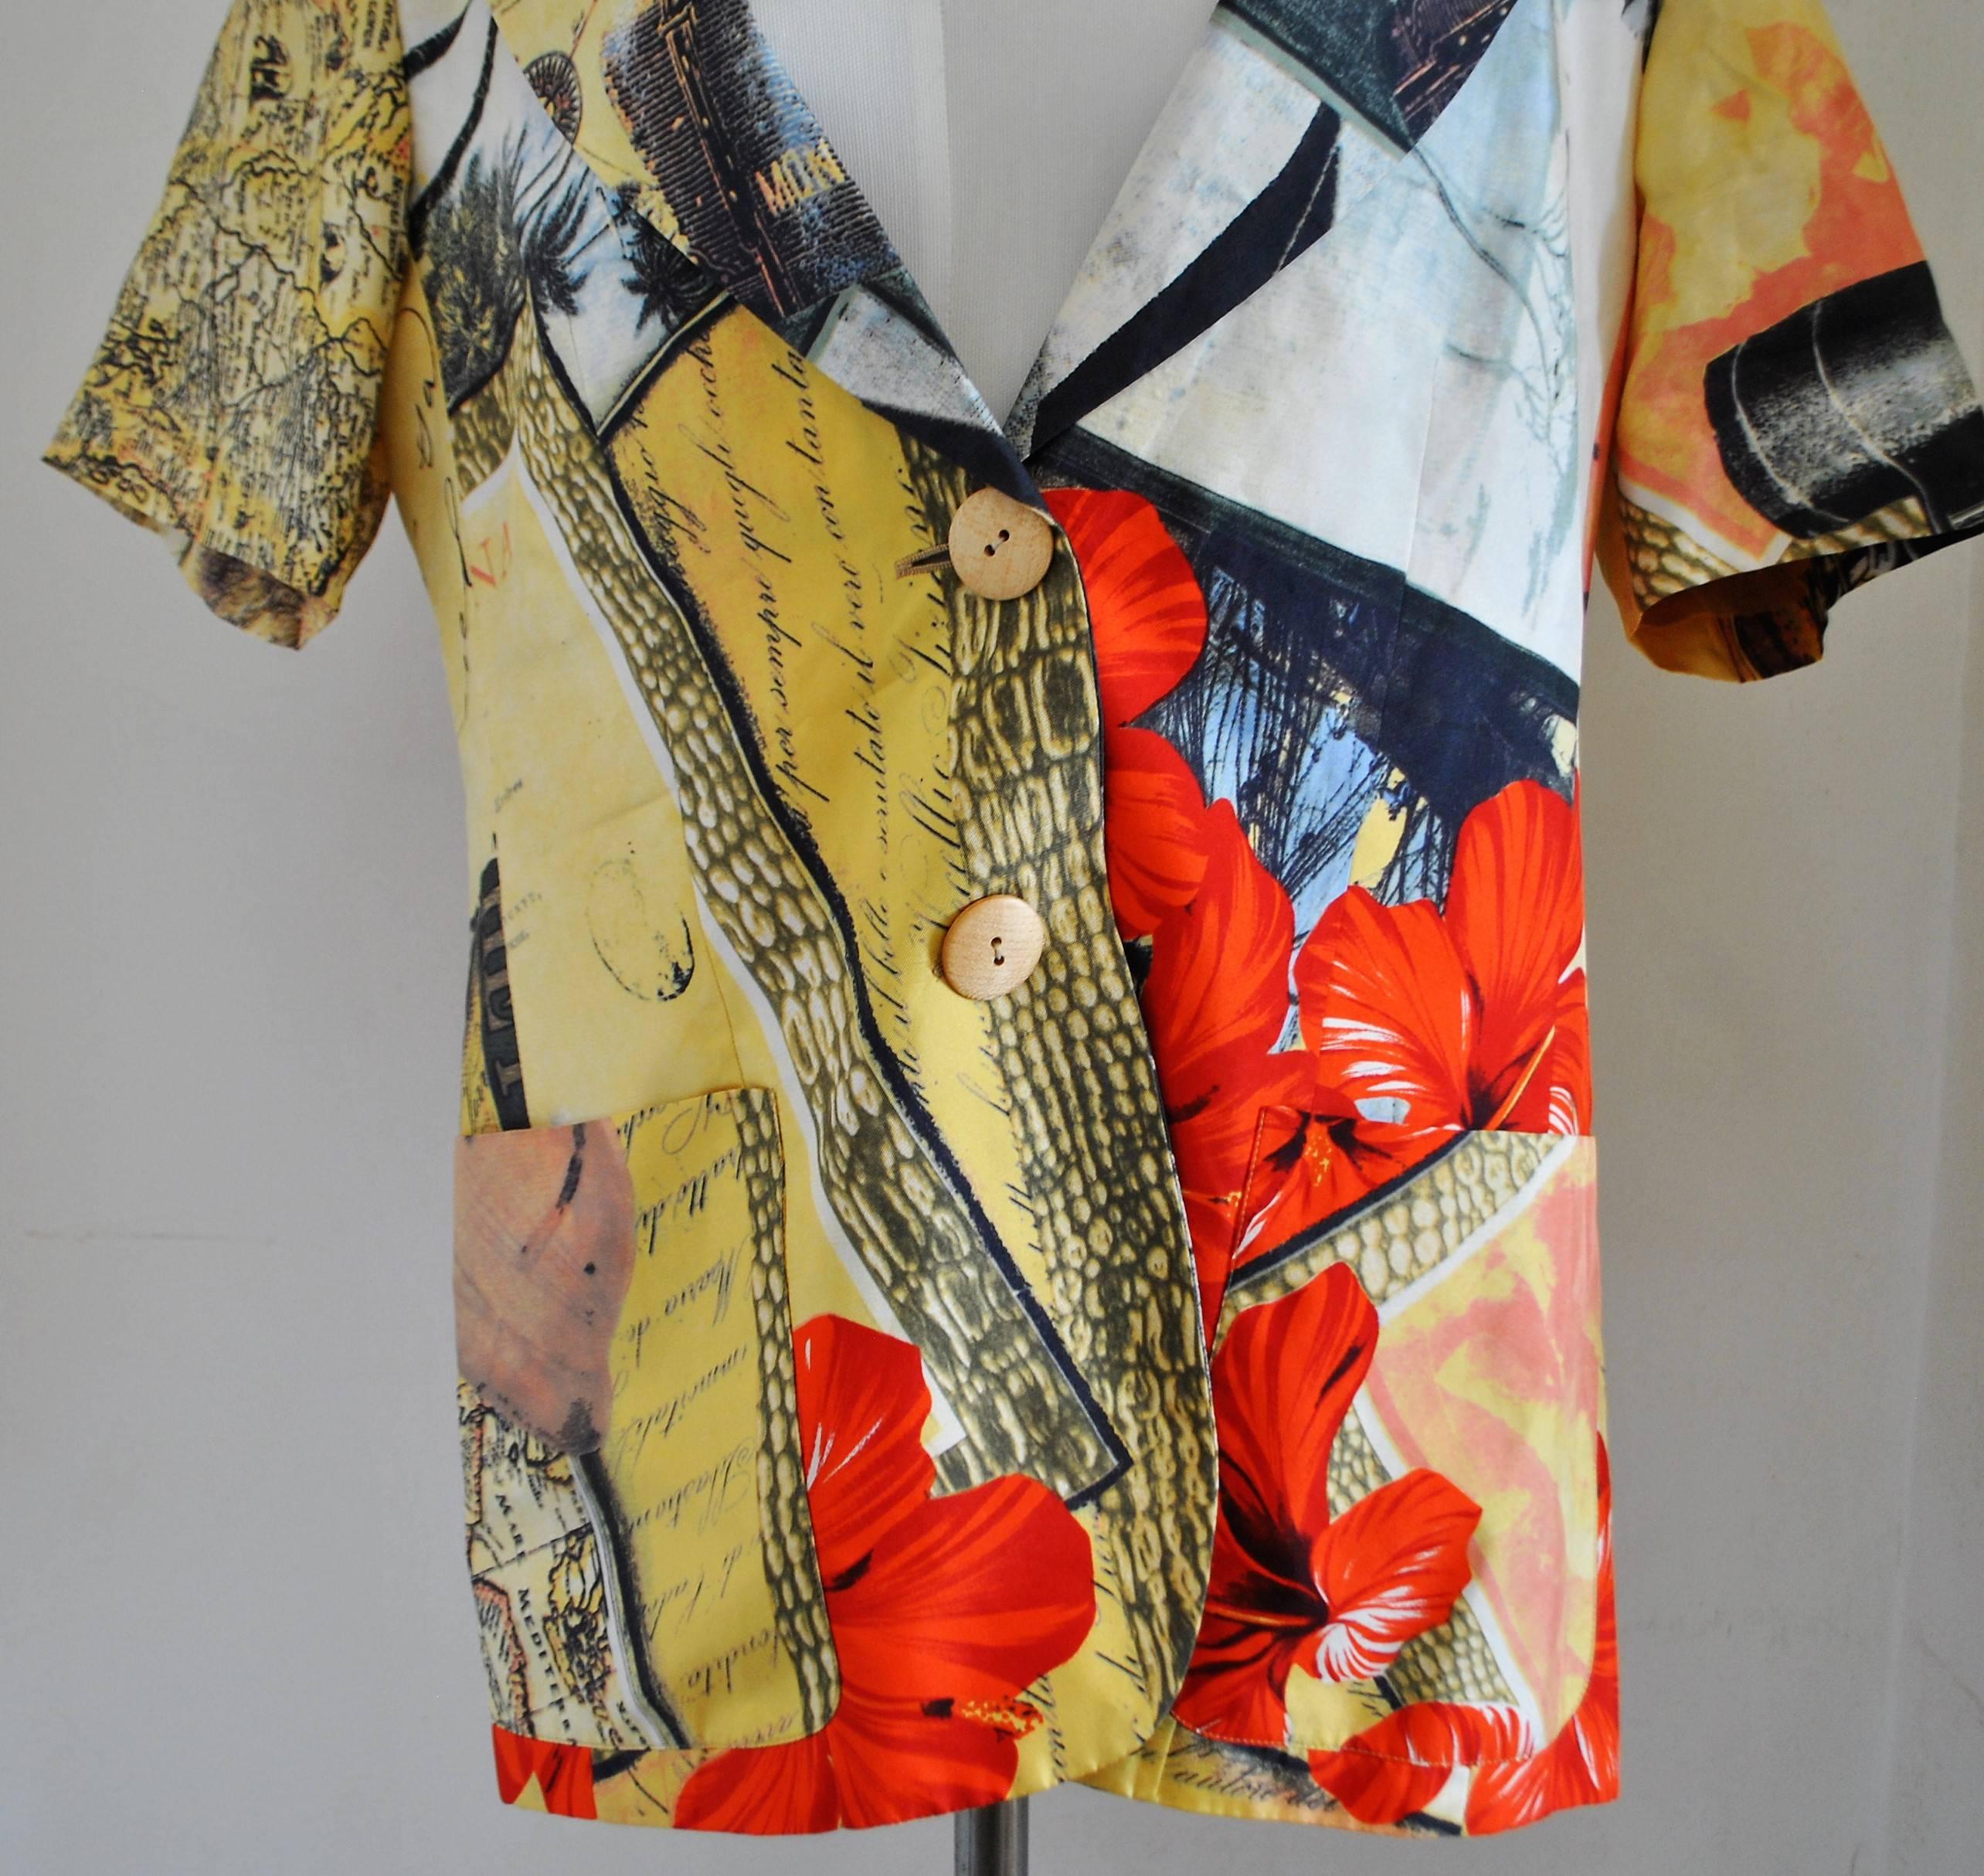 Genny by Gianni Versace Shirt
Composition: 100% silk